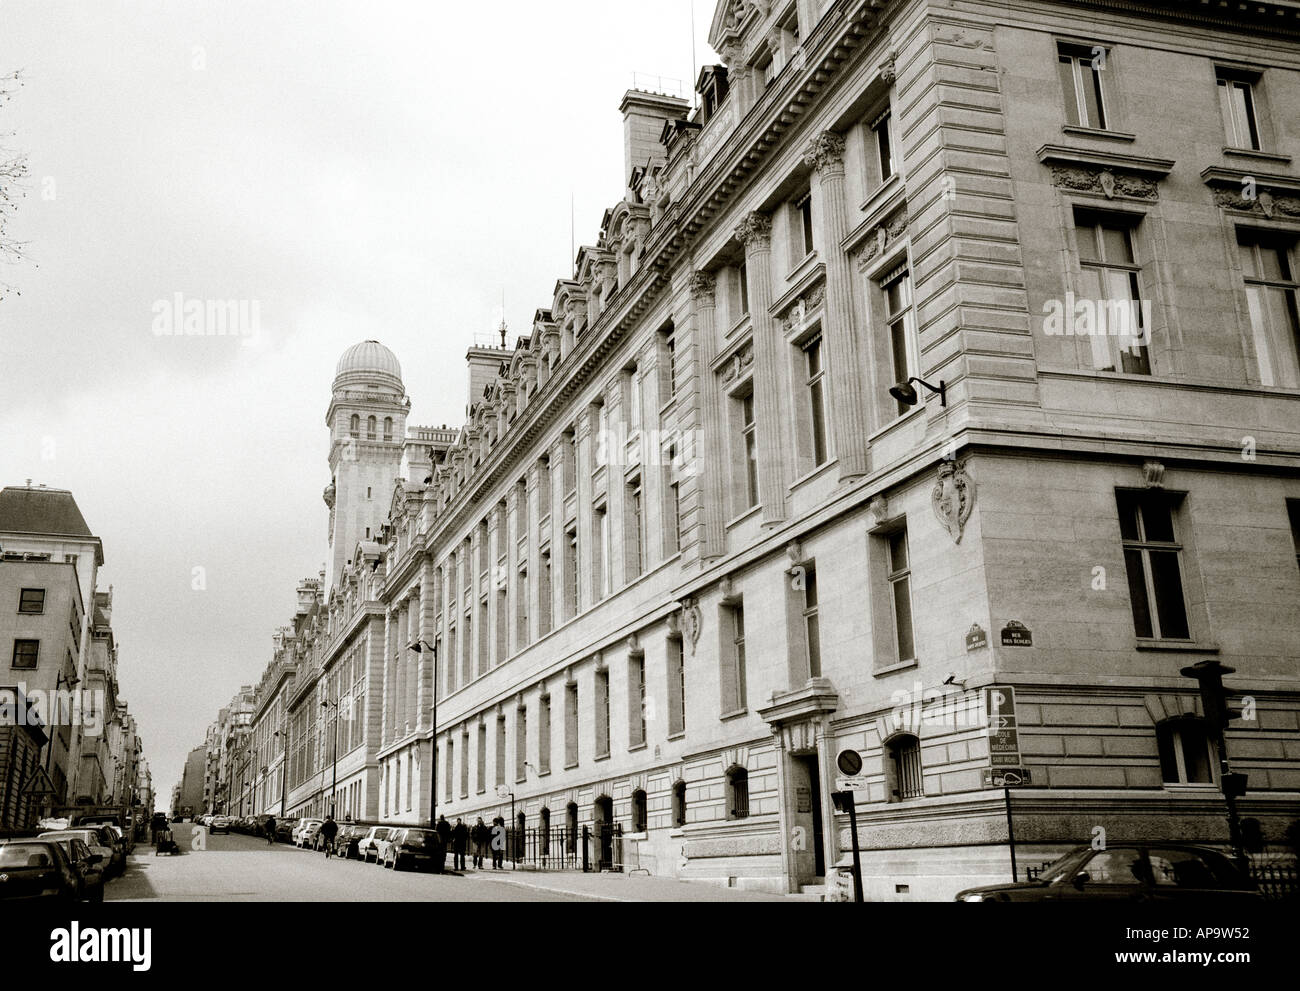 The Sorbonne University in the city of Paris In France In Europe Stock Photo